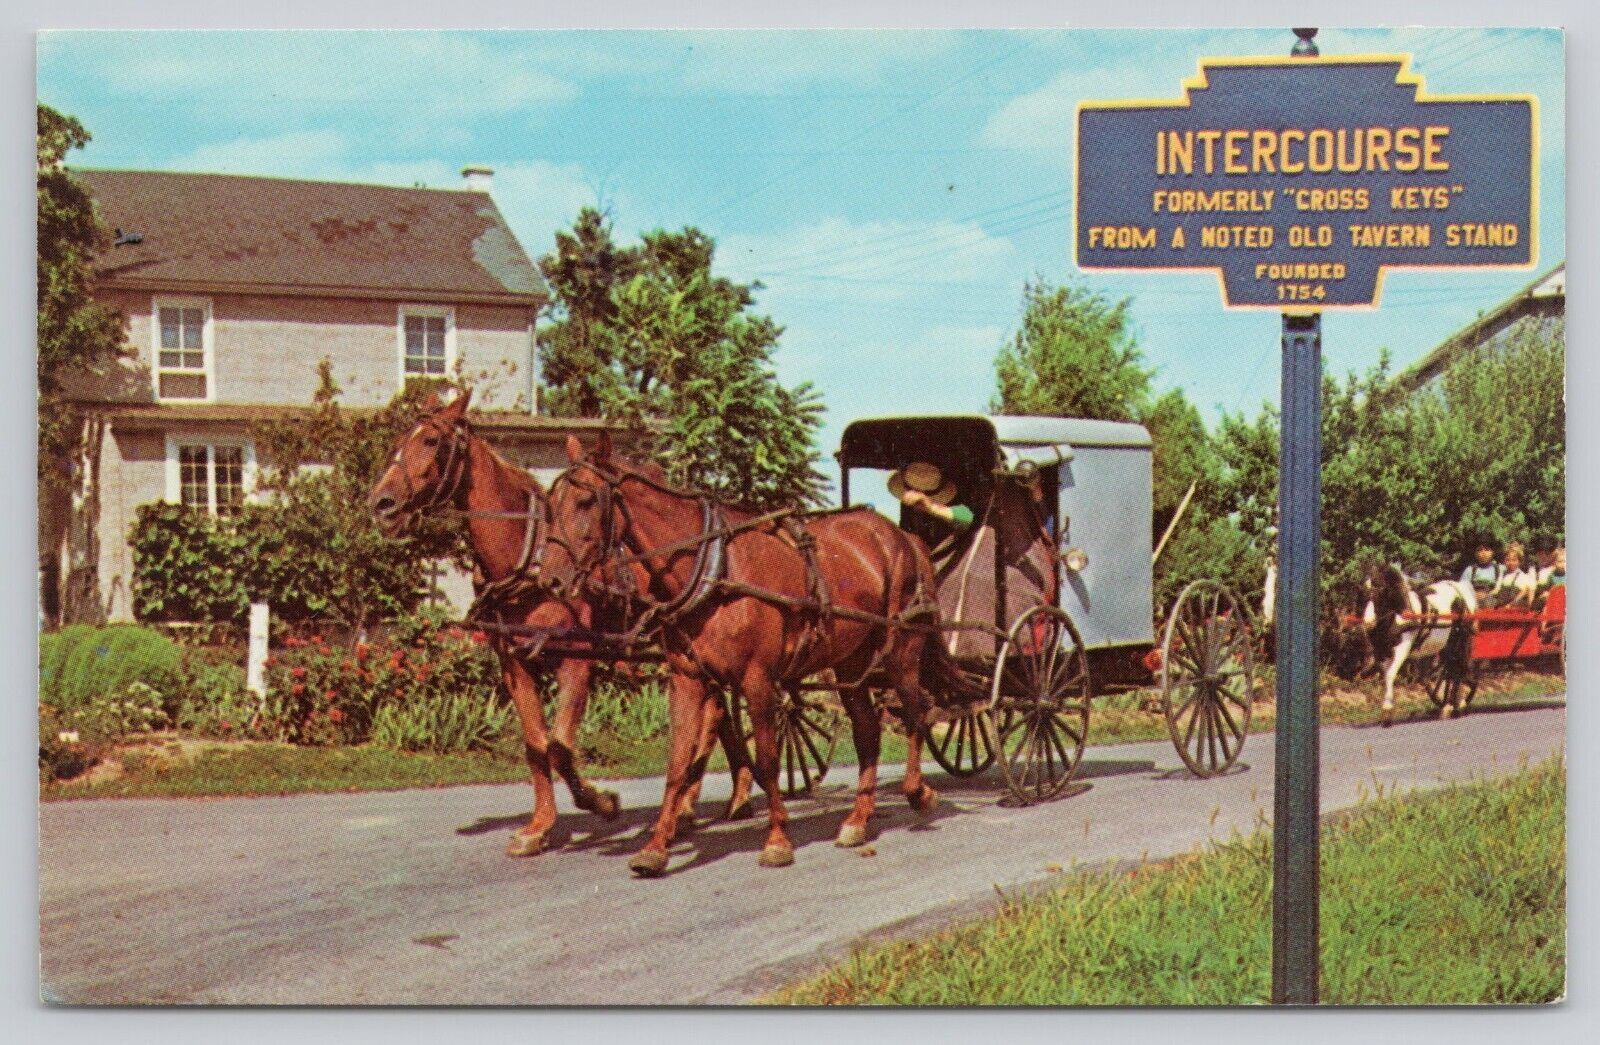 Greetings from Amish Country Intercourse Formerly Cross Keys Horses Postcard